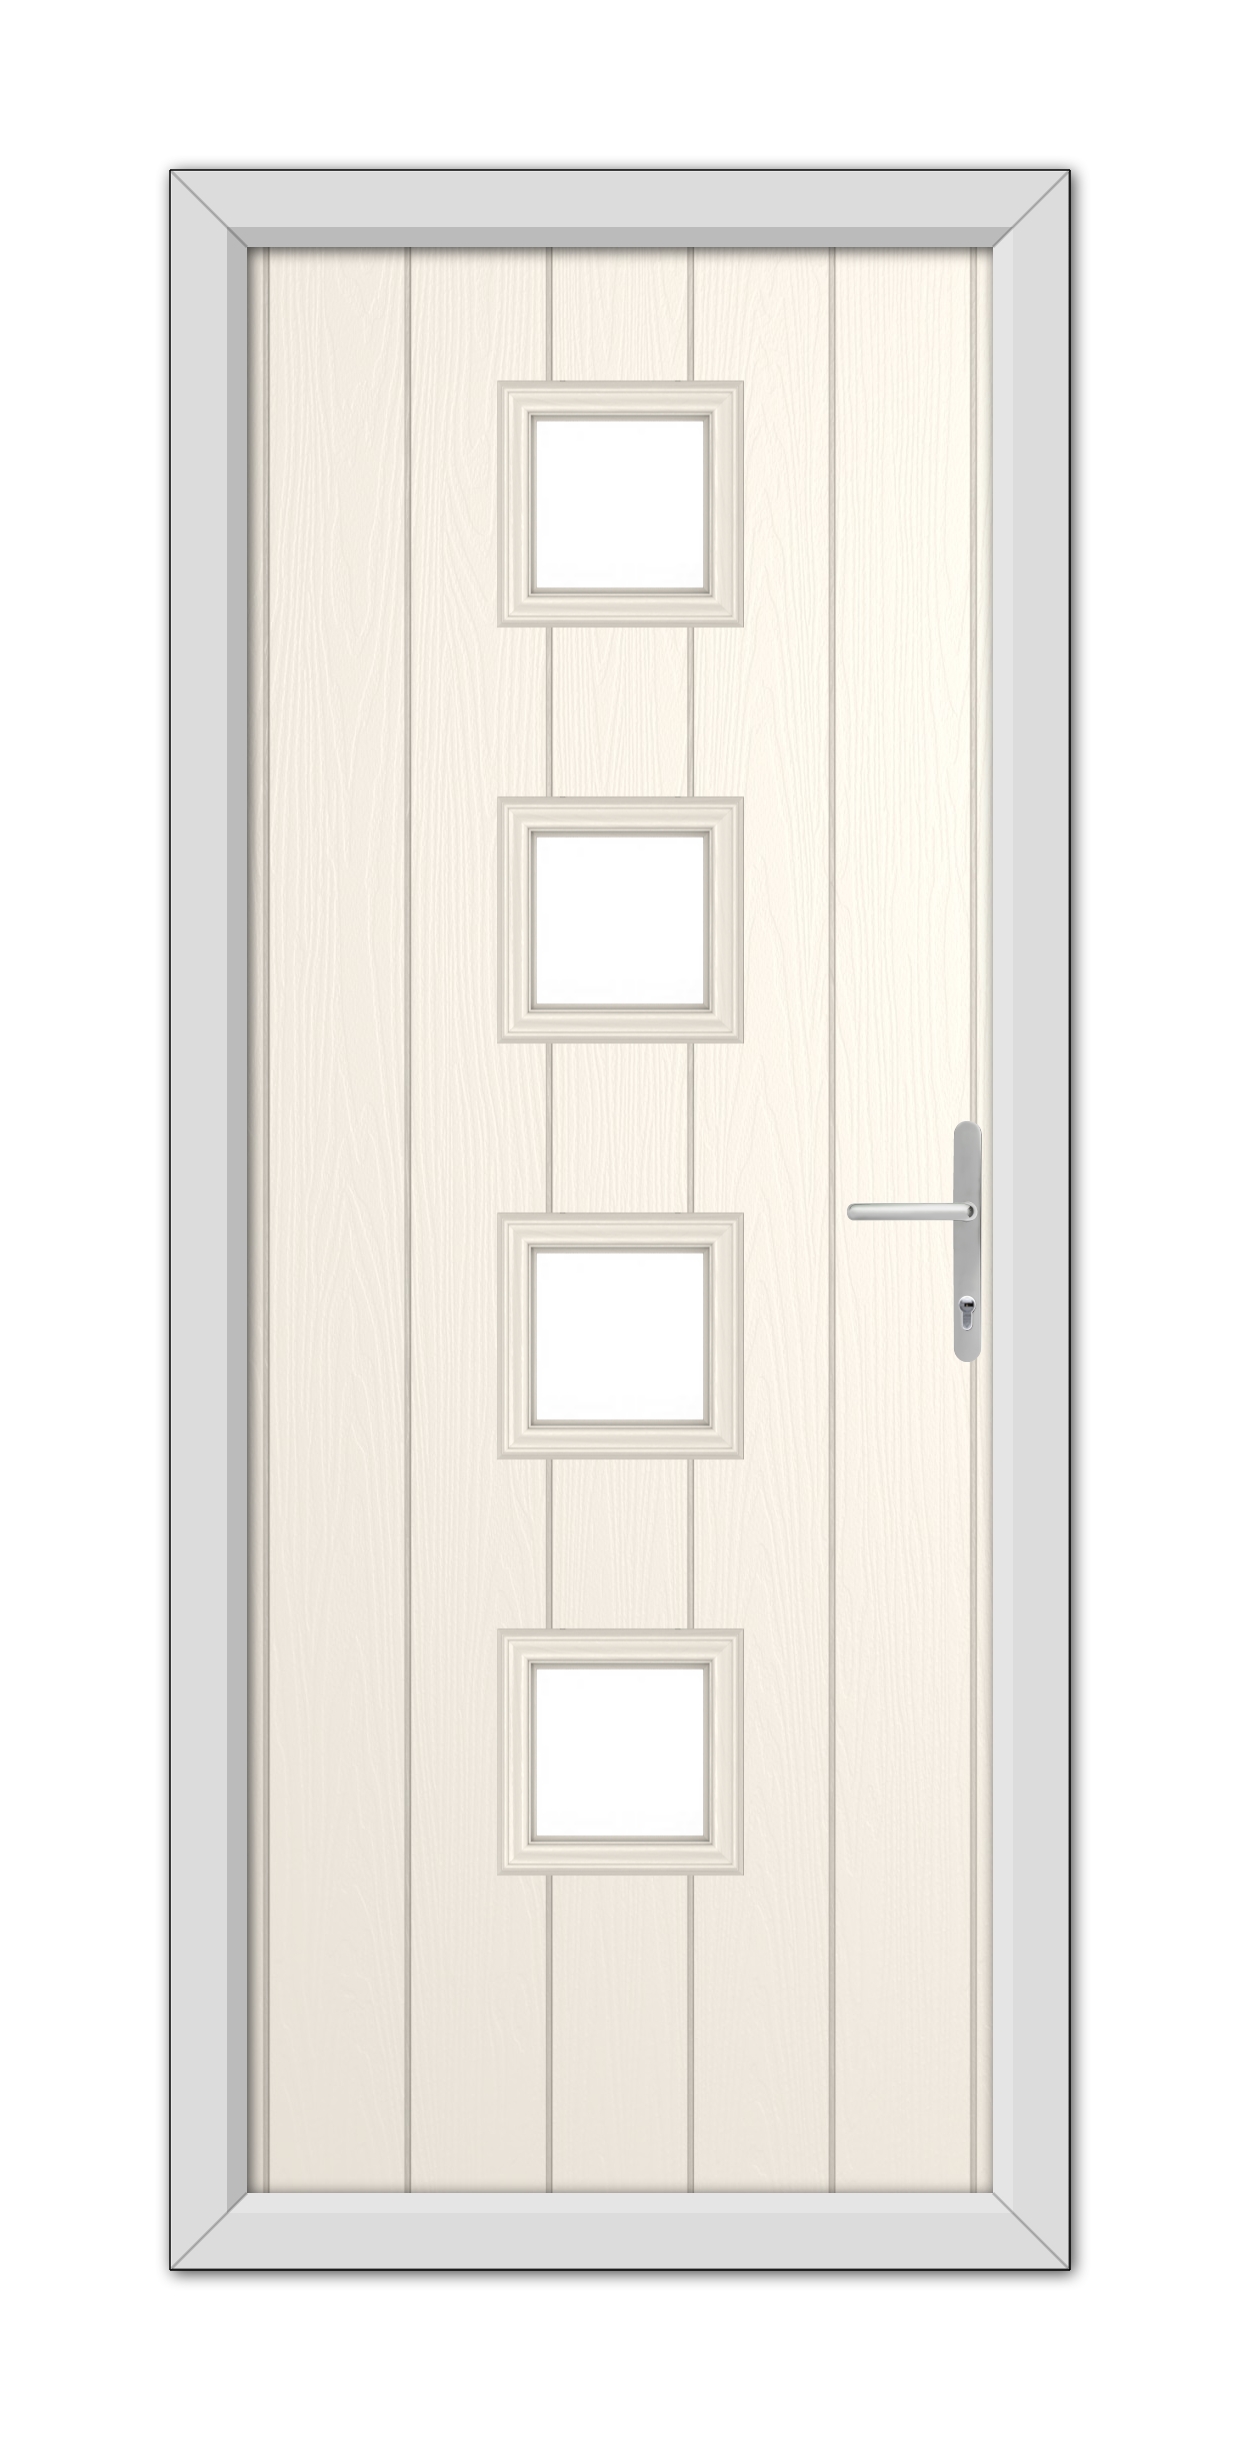 White Foil Hamilton Composite Door 48mm Timber Core with four glass panels and a metal handle, framed within a gray door frame.